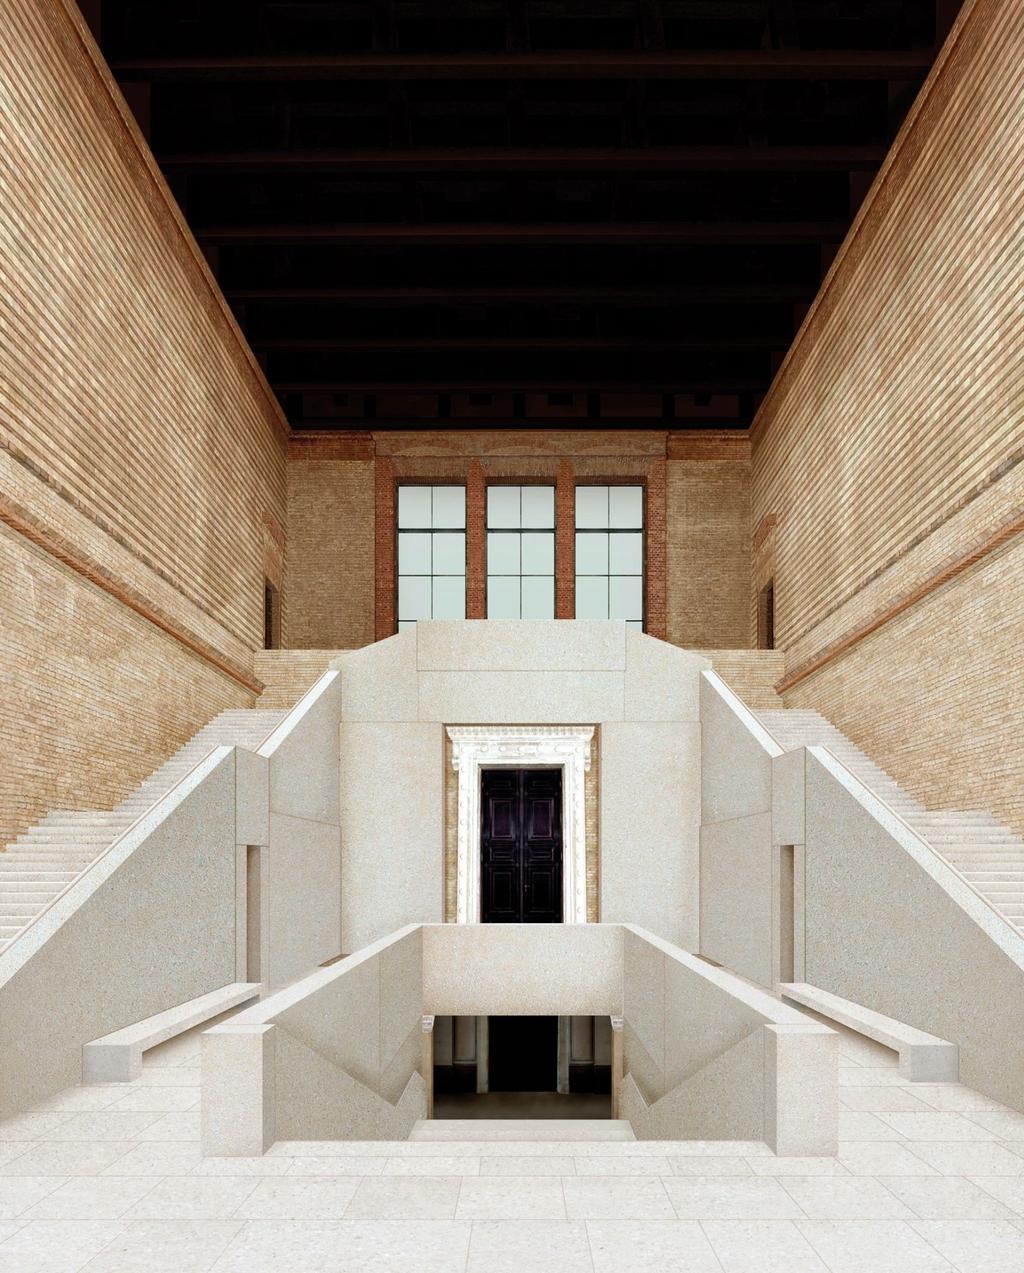 Neues Museum, Berlin, Germany: Renovation and